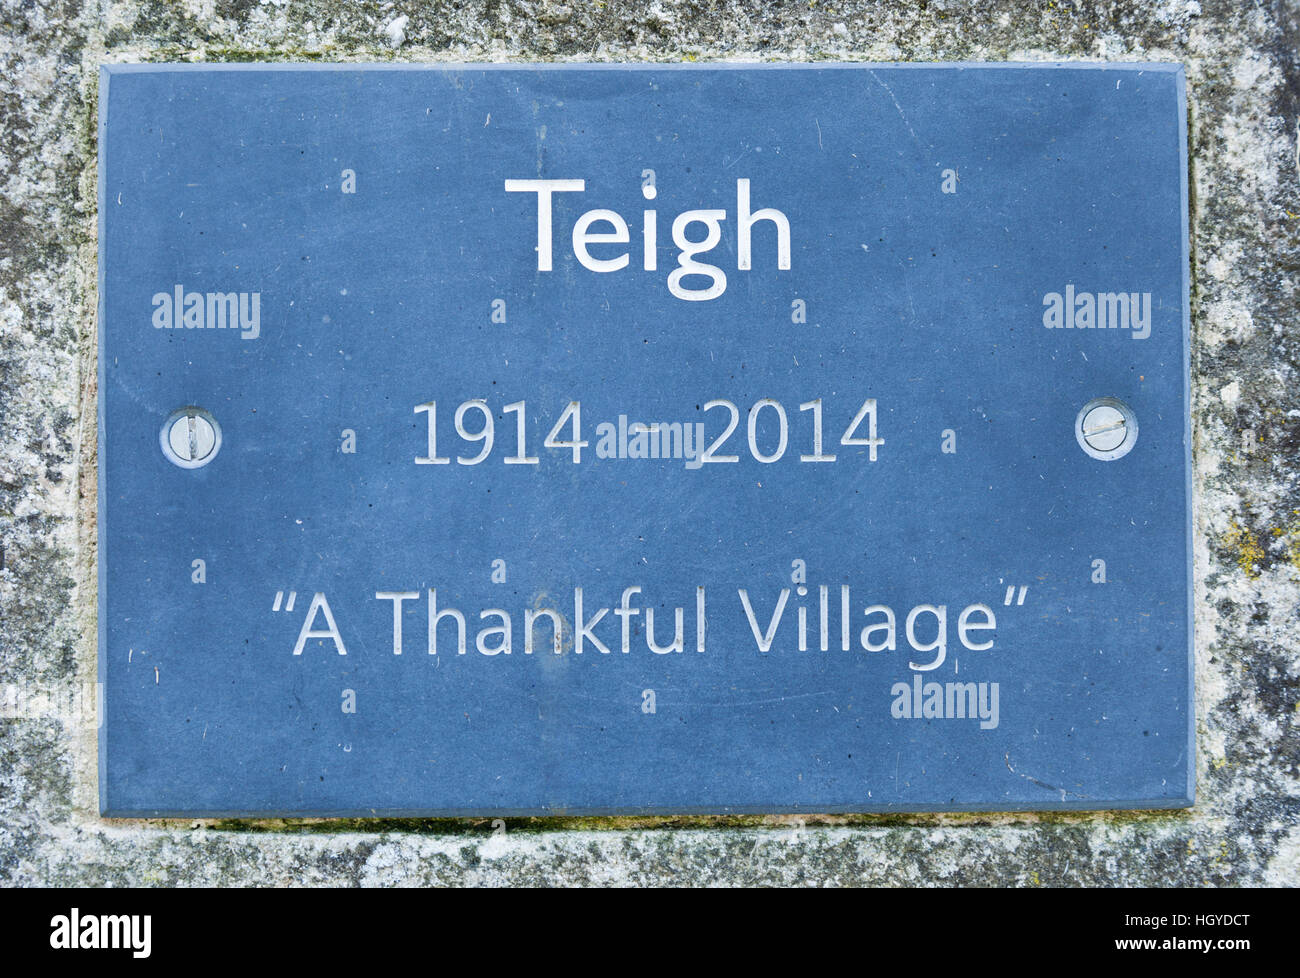 A plaque in the village of Teigh, Rutland, England, commemorating 100 years as a 'Thankful Village' 1914 to 2014. Stock Photo